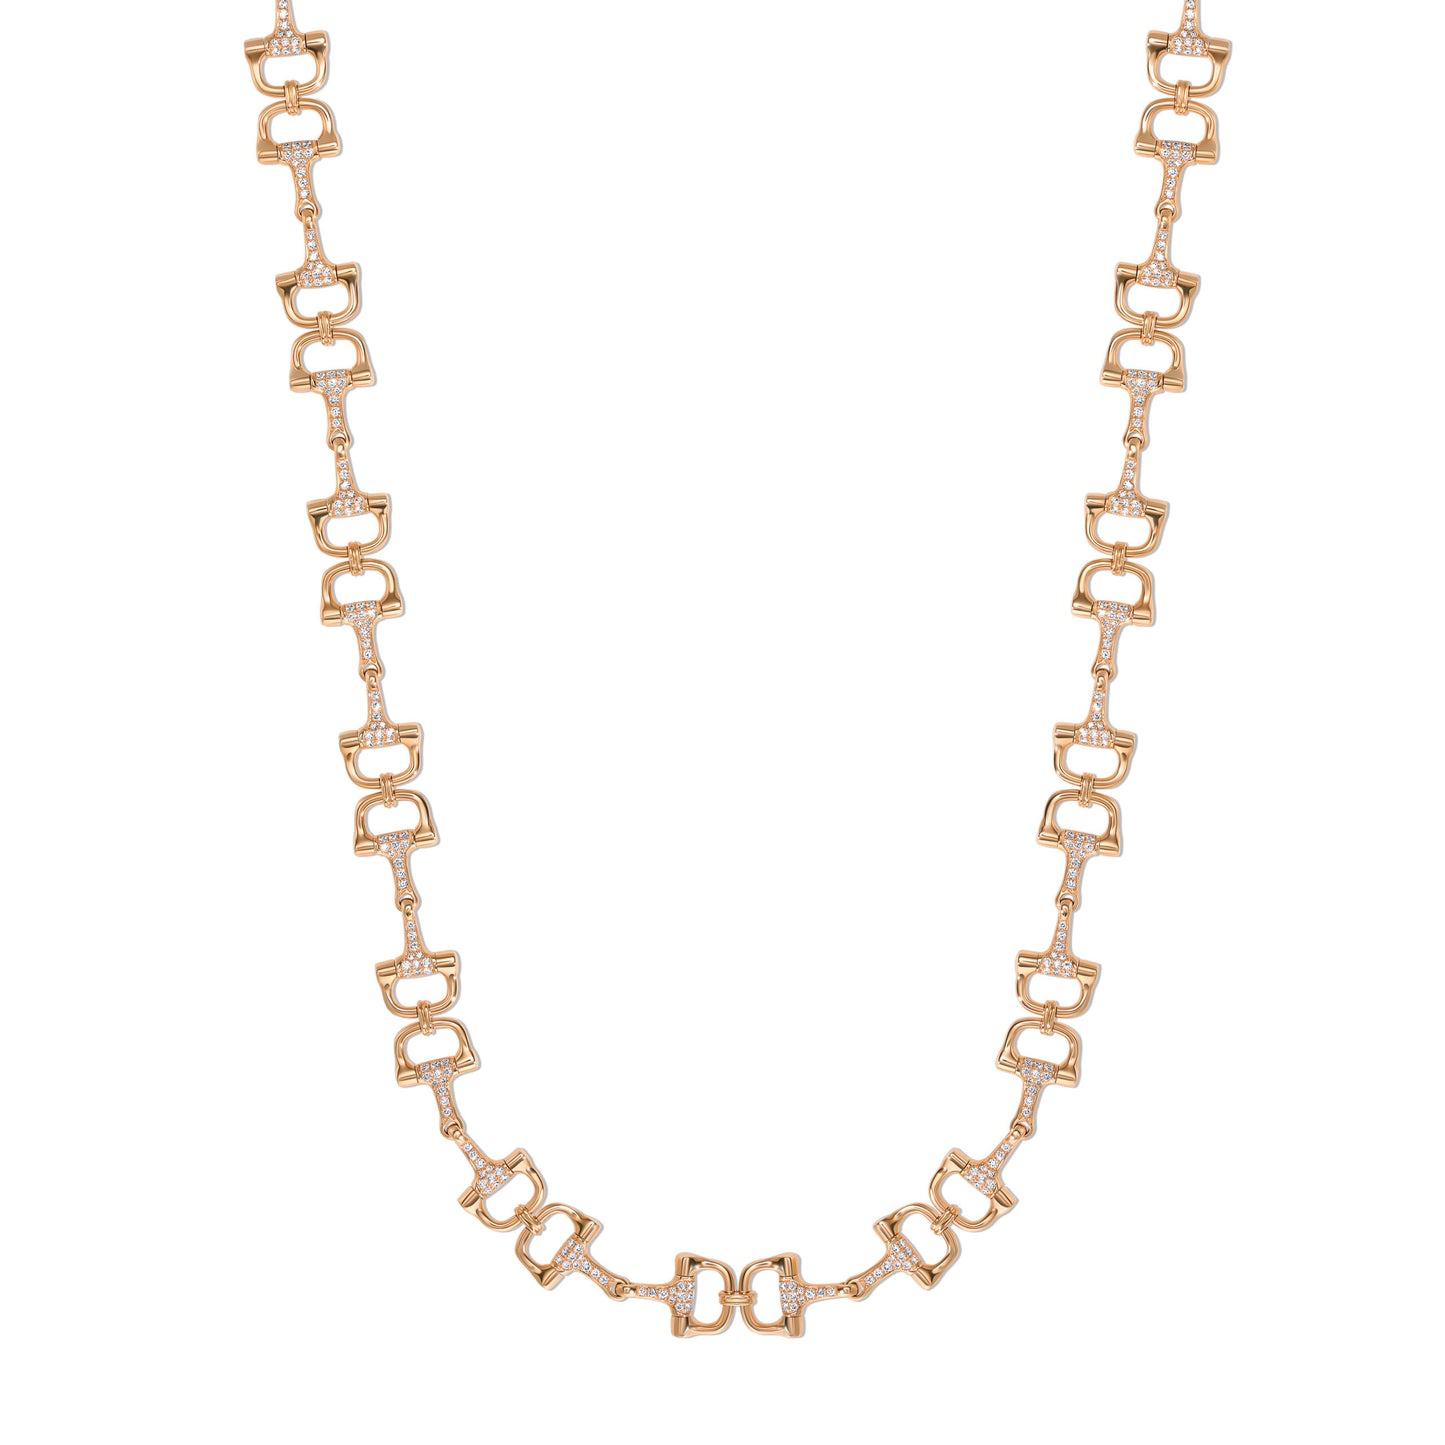 Bit of LUV™ 19 Necklace Rose Gold